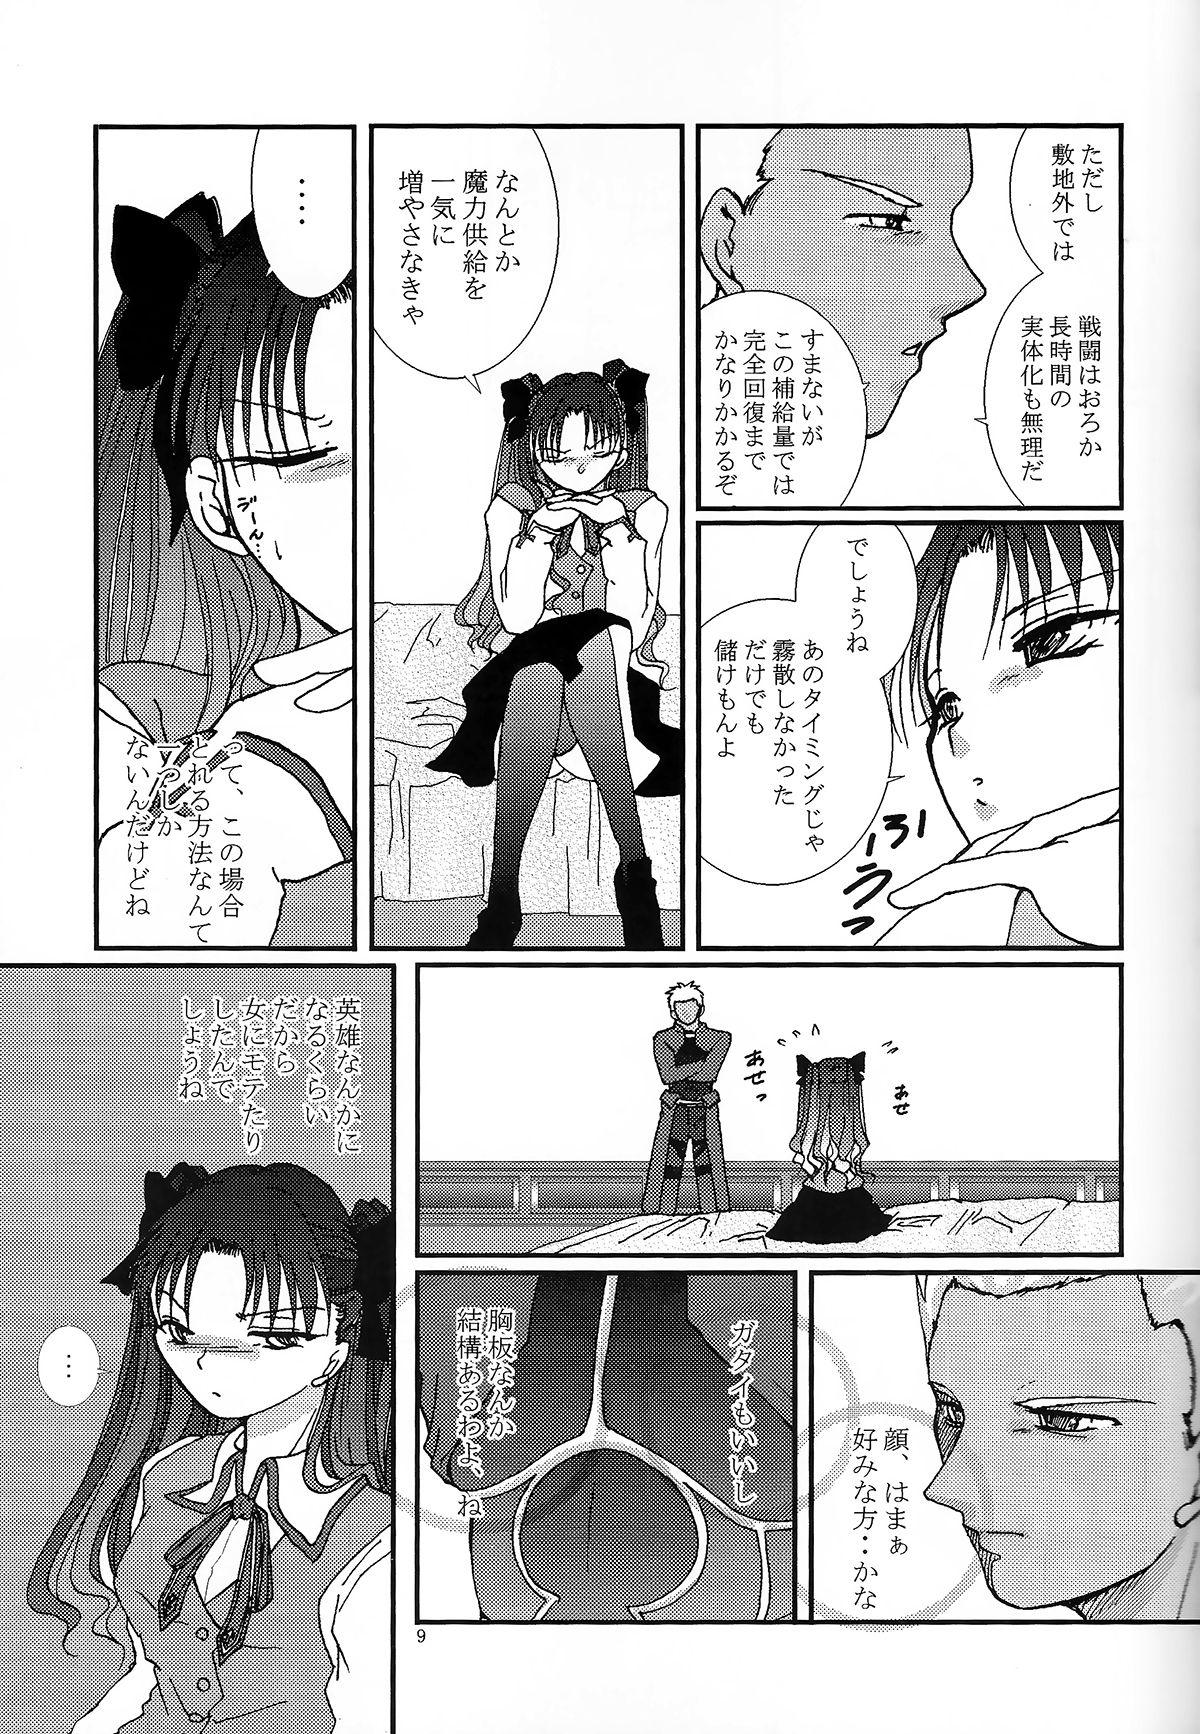 Exhibitionist Question-7 - Fate stay night Femdom Clips - Page 7